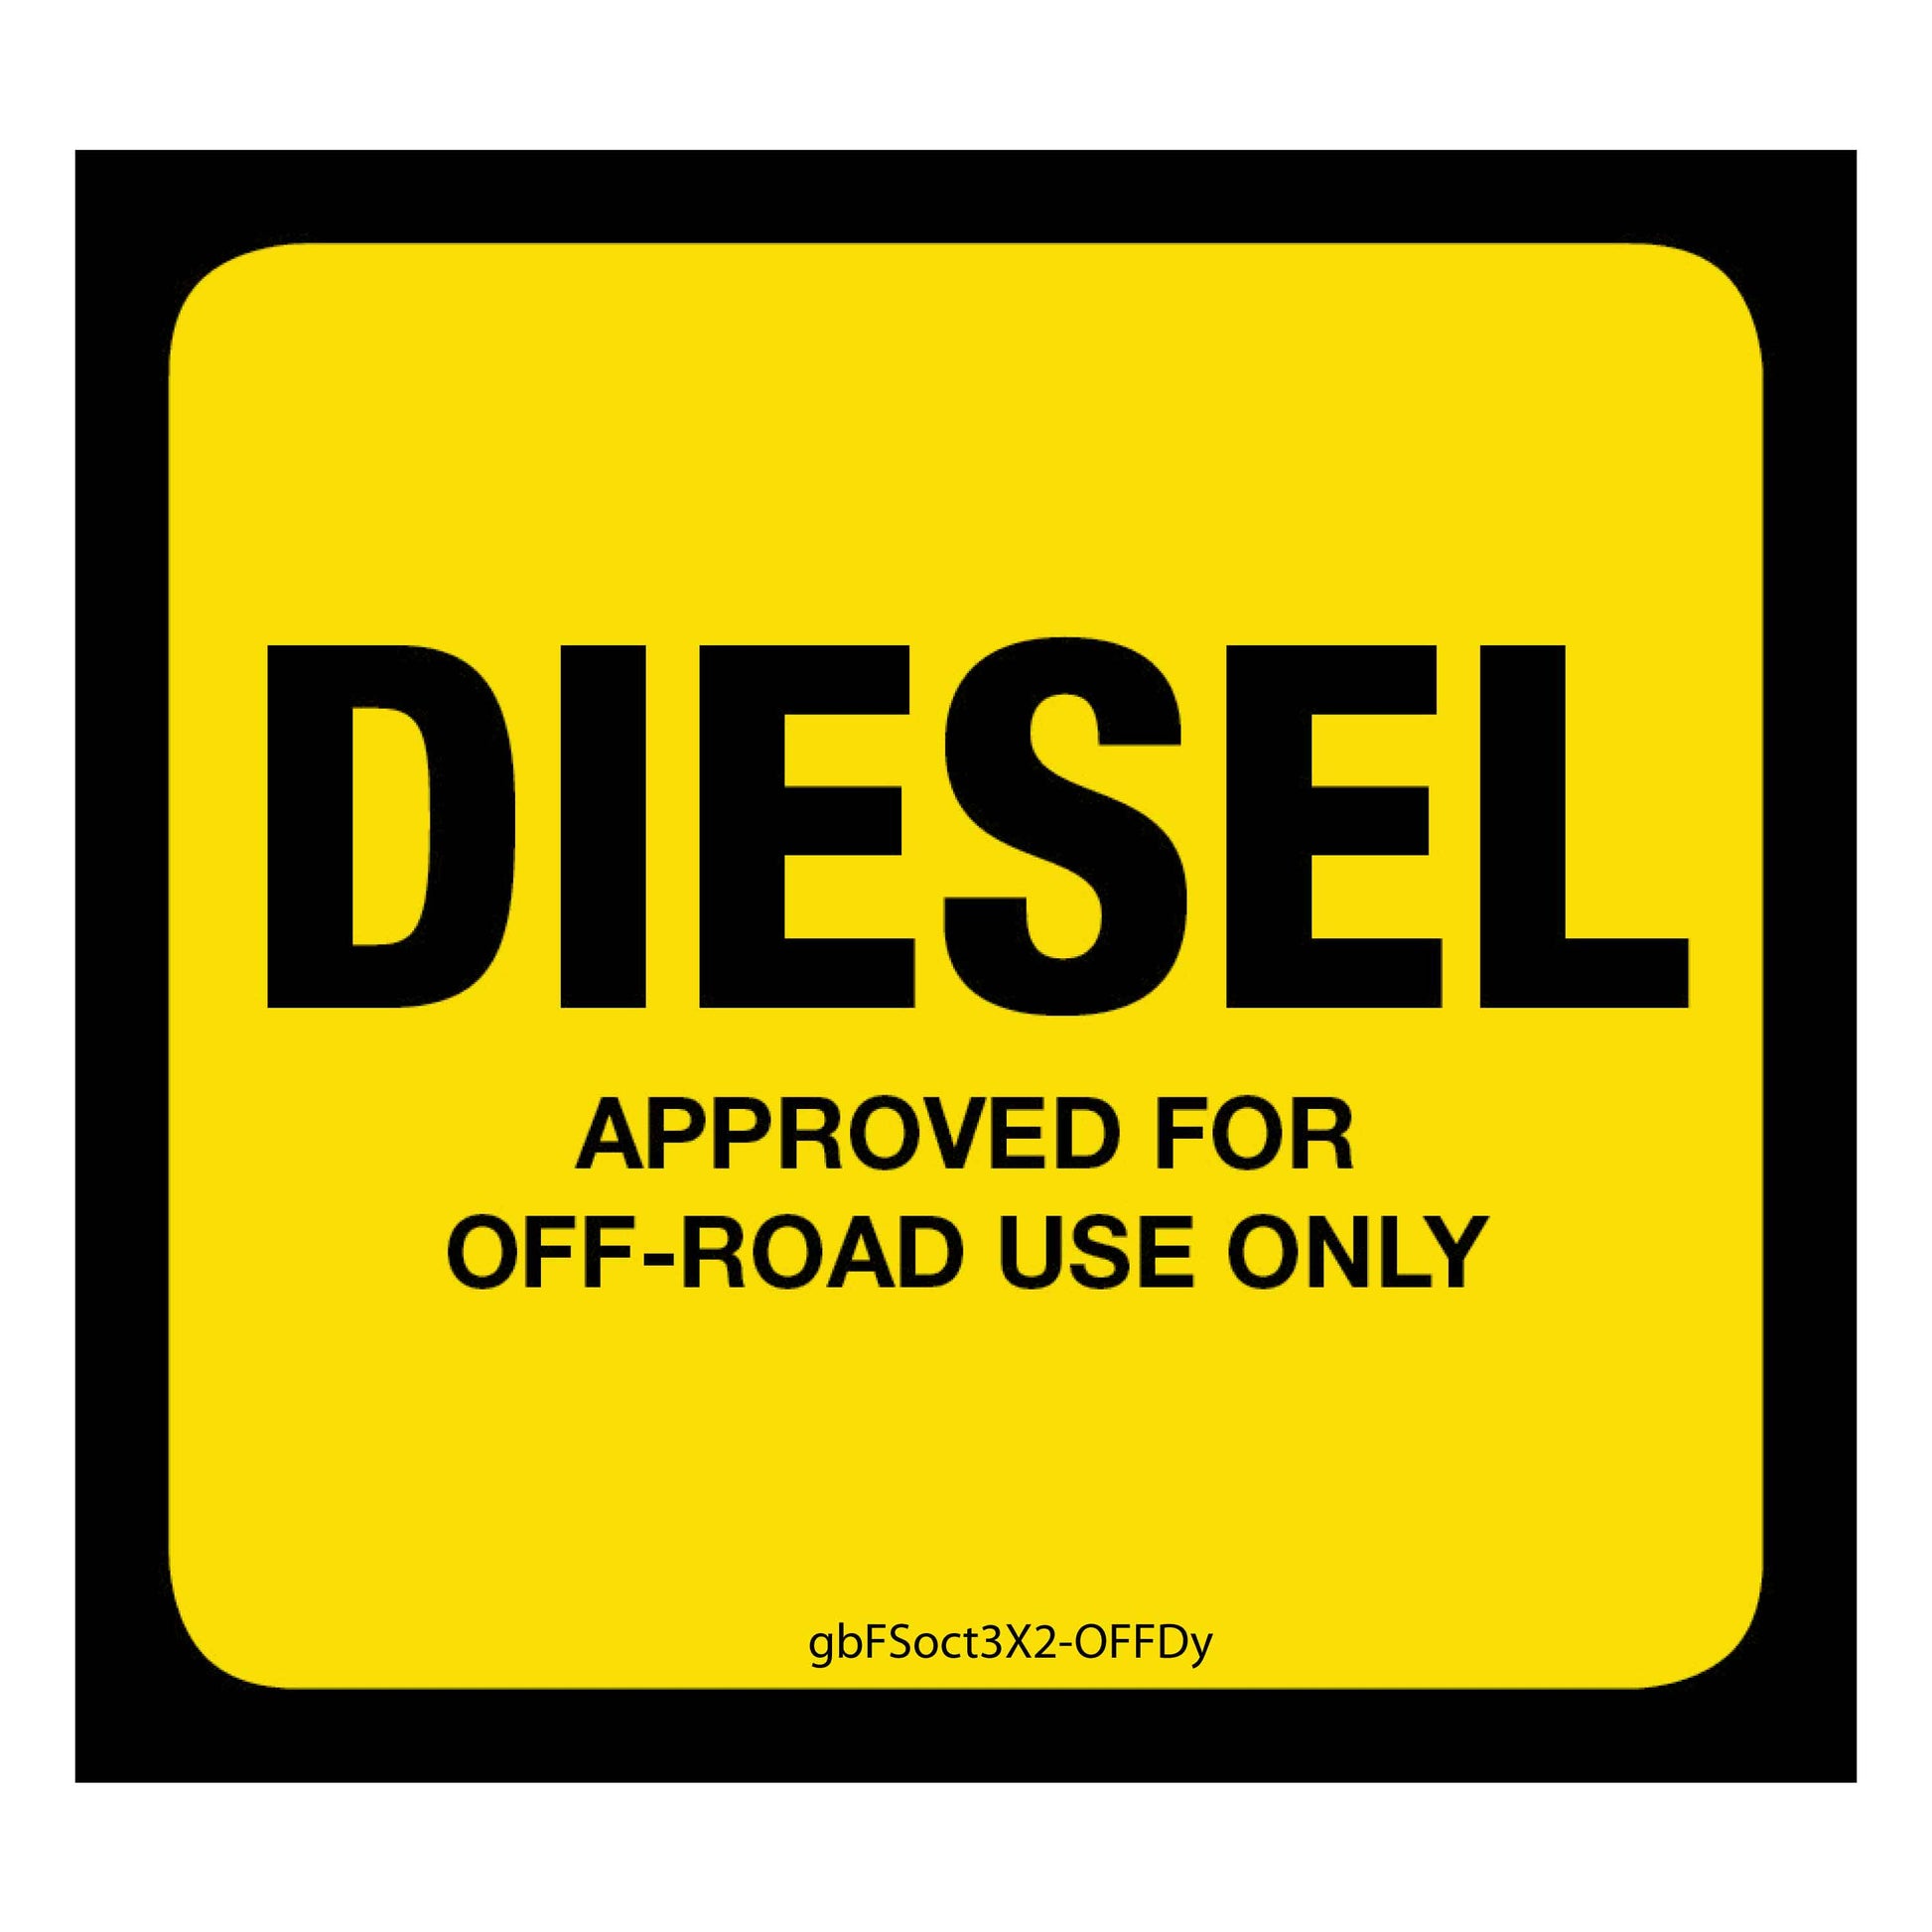 Diesel (Off Road) Pump Decal, Yellow. 3 inches by 2.75 inches in size.